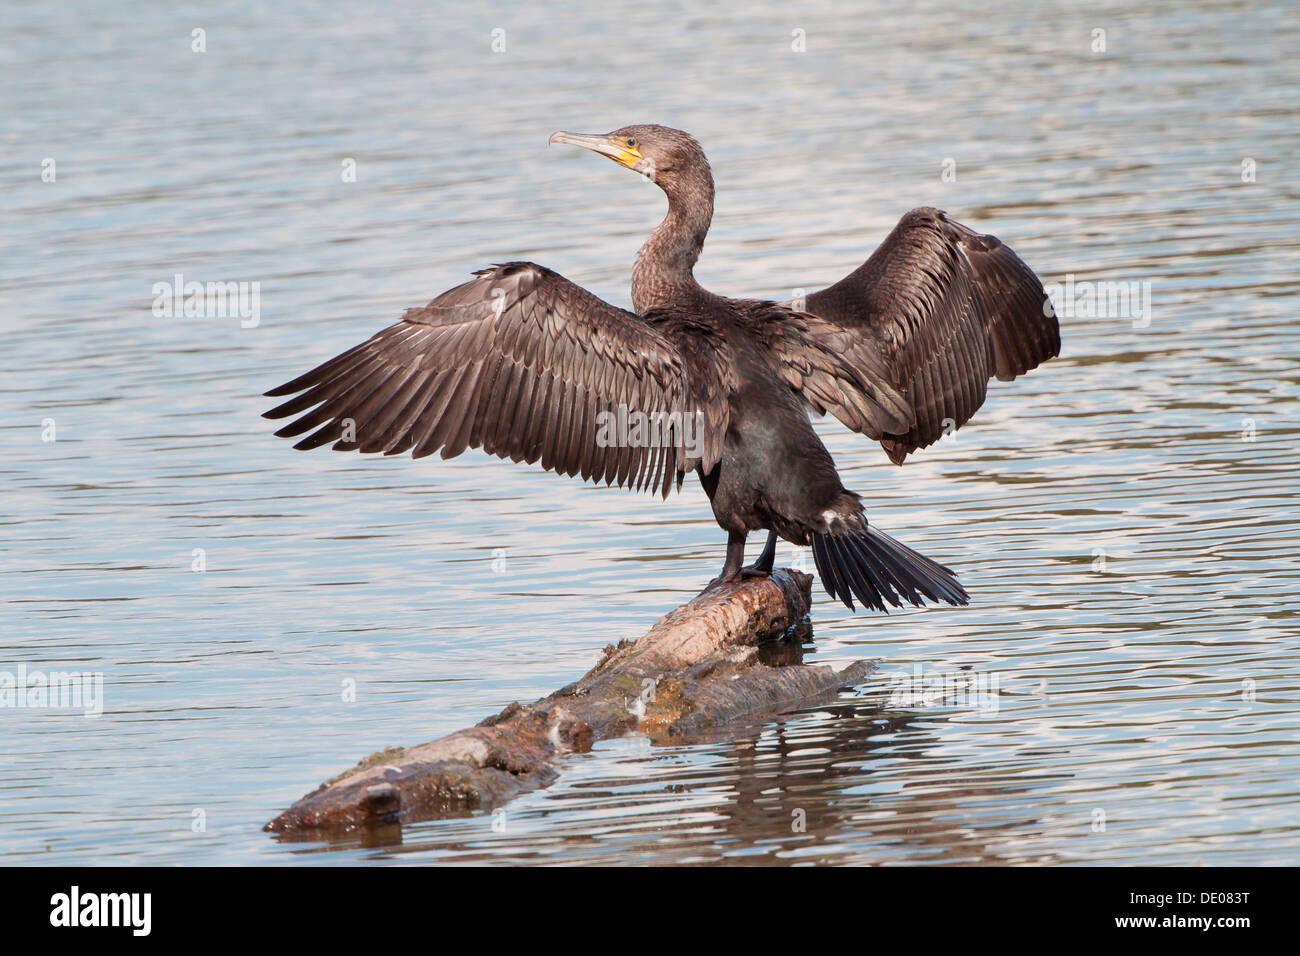 Great Cormorant or Great Black Cormorant (Phalacrocorax carbo) with outstretched wings Stock Photo